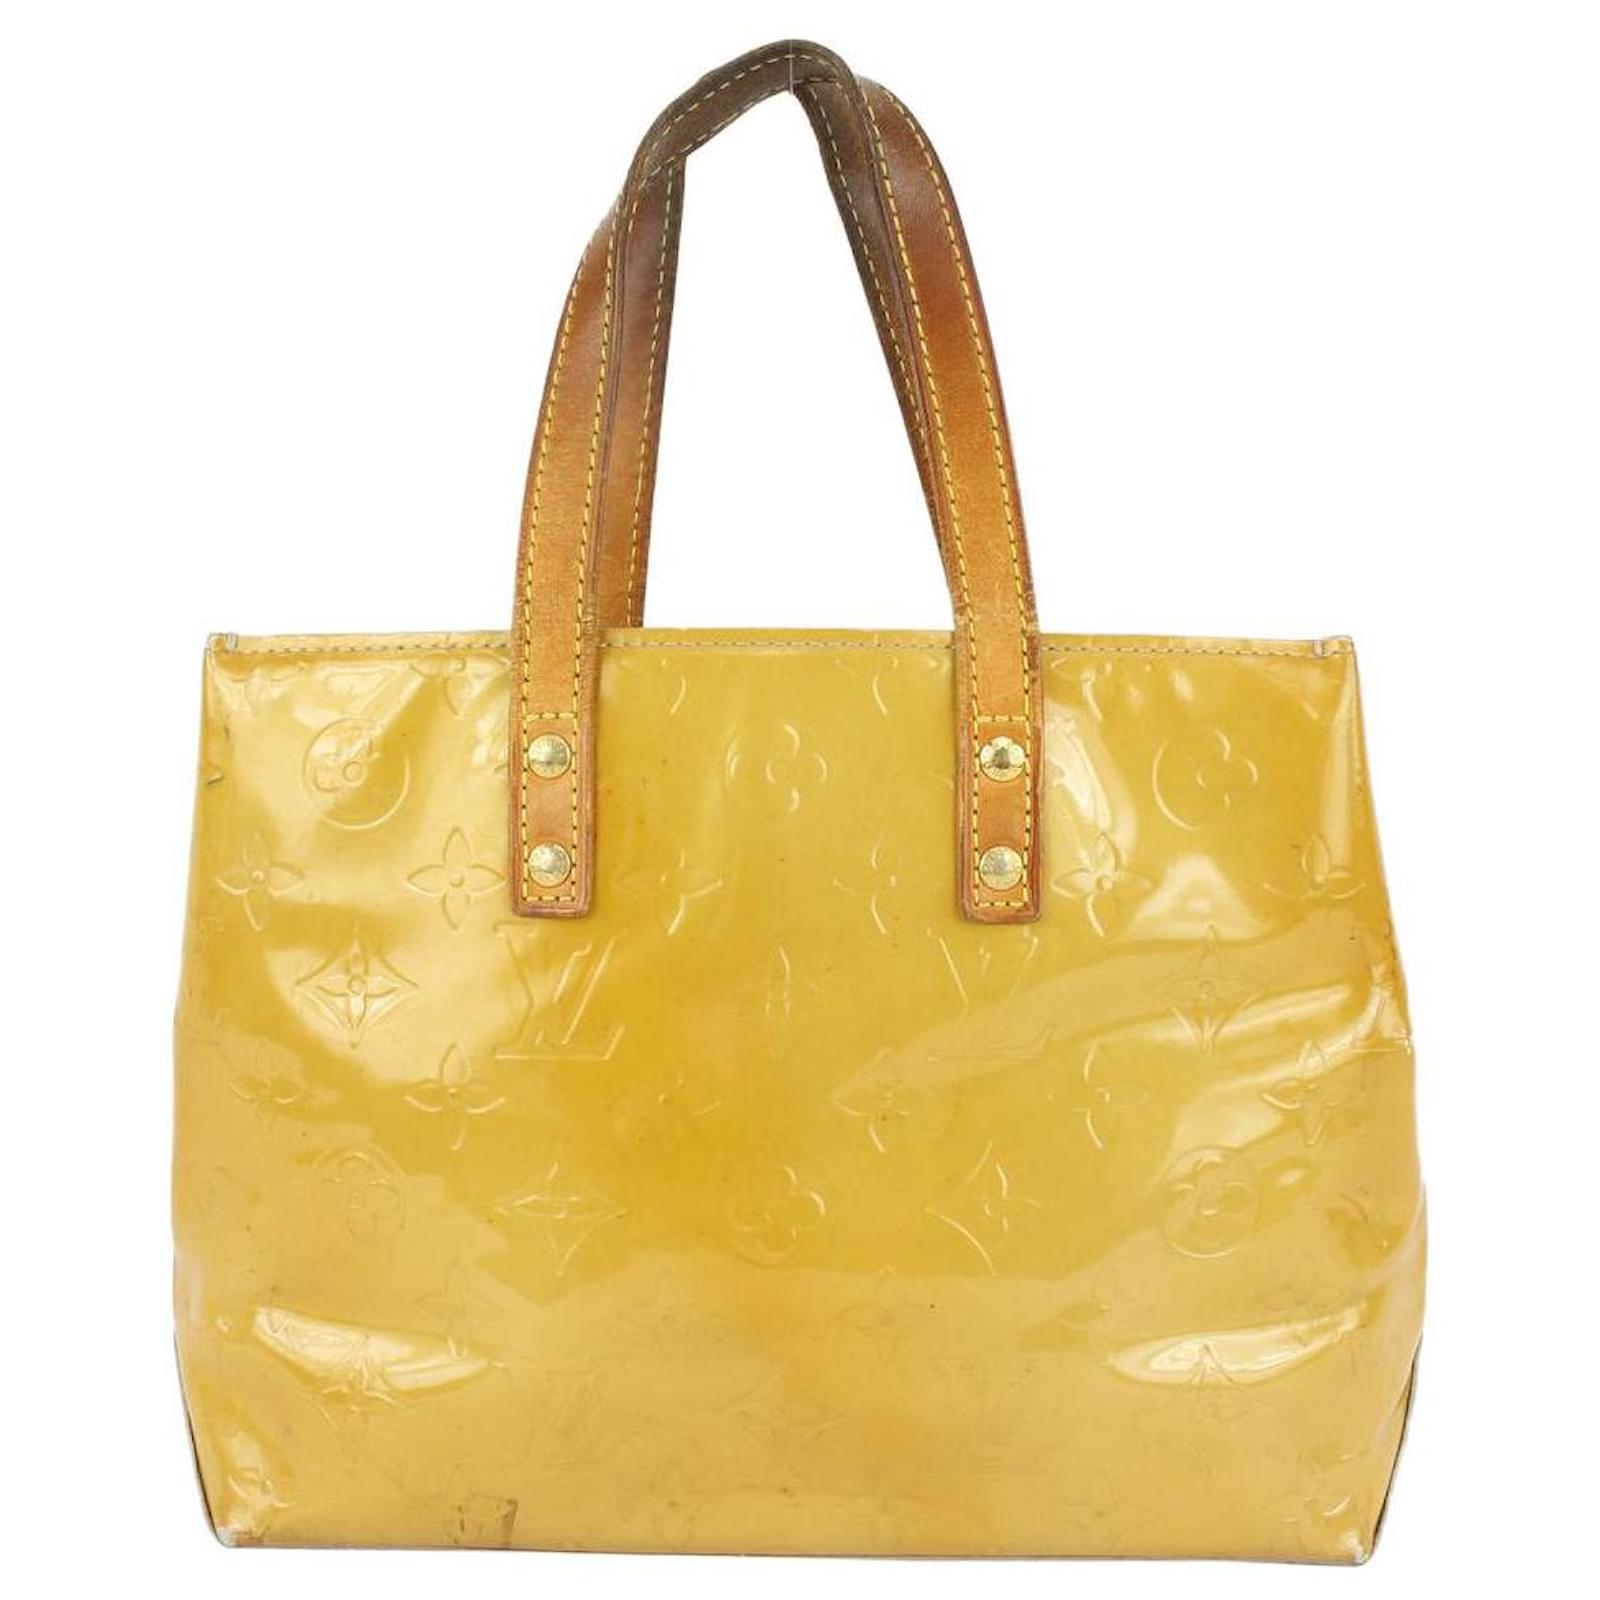 Reade leather tote